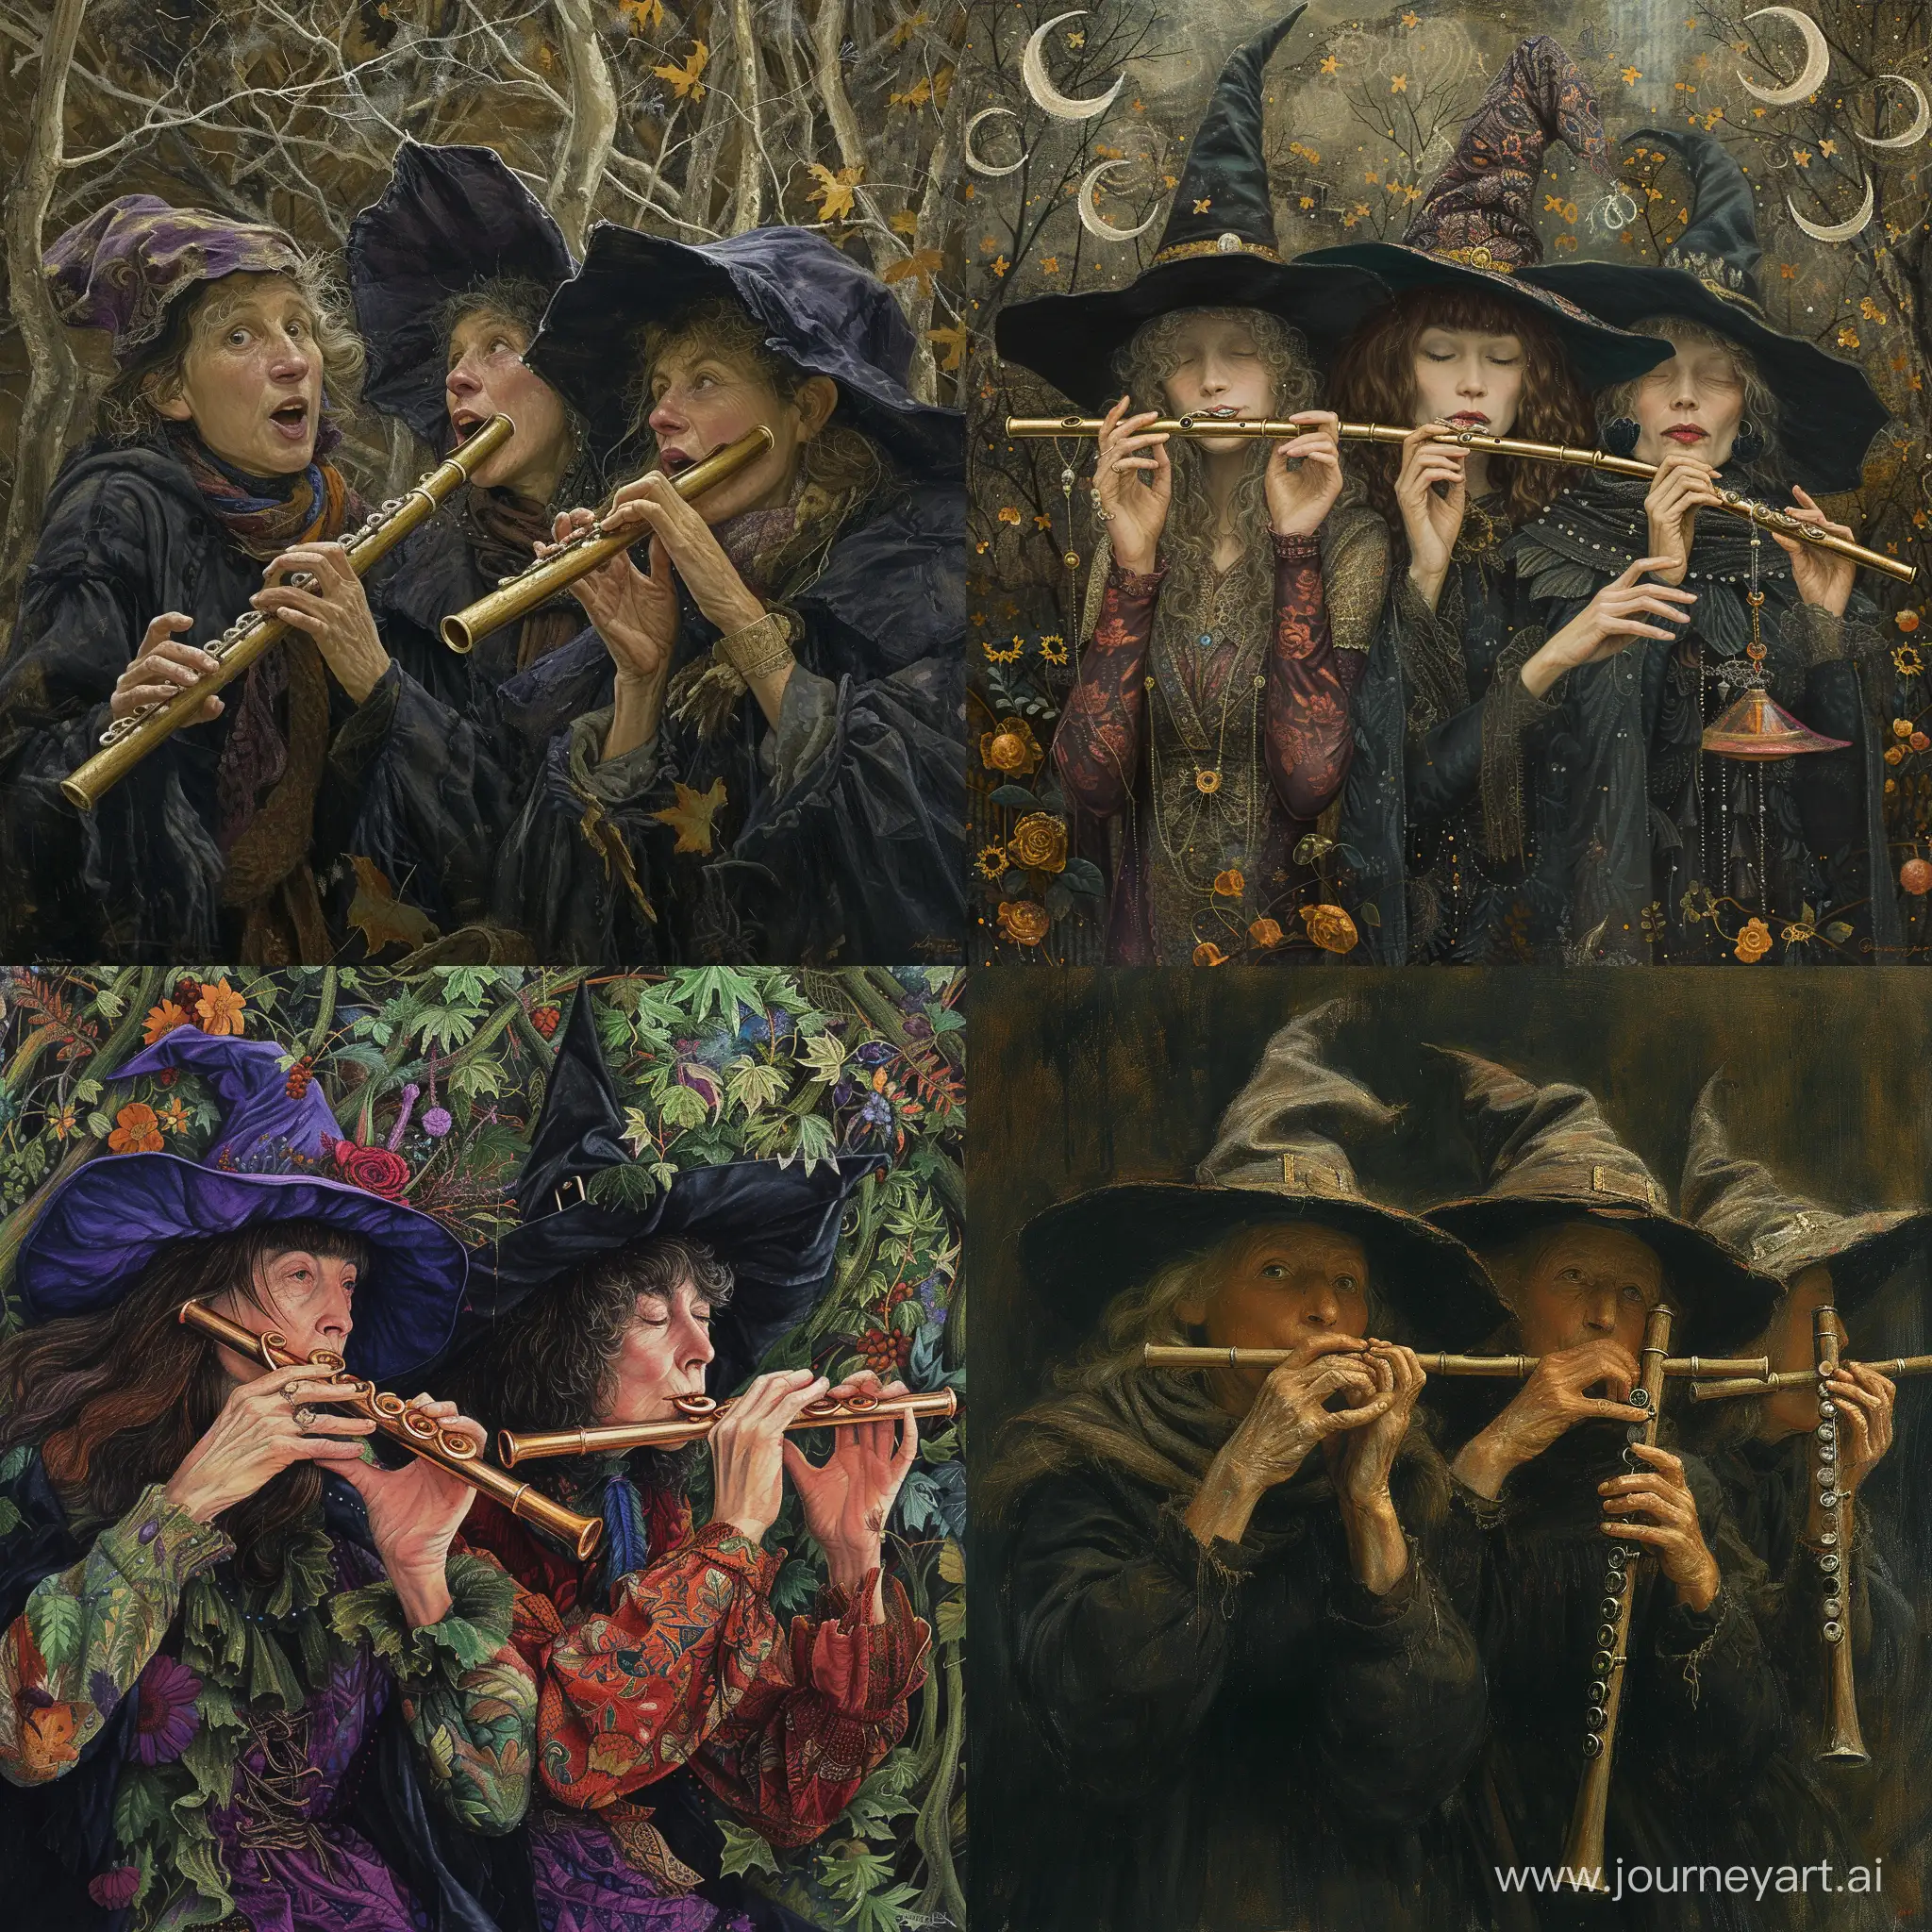 Enchanting-Witches-Creating-Melodic-Art-Whistling-Flutes